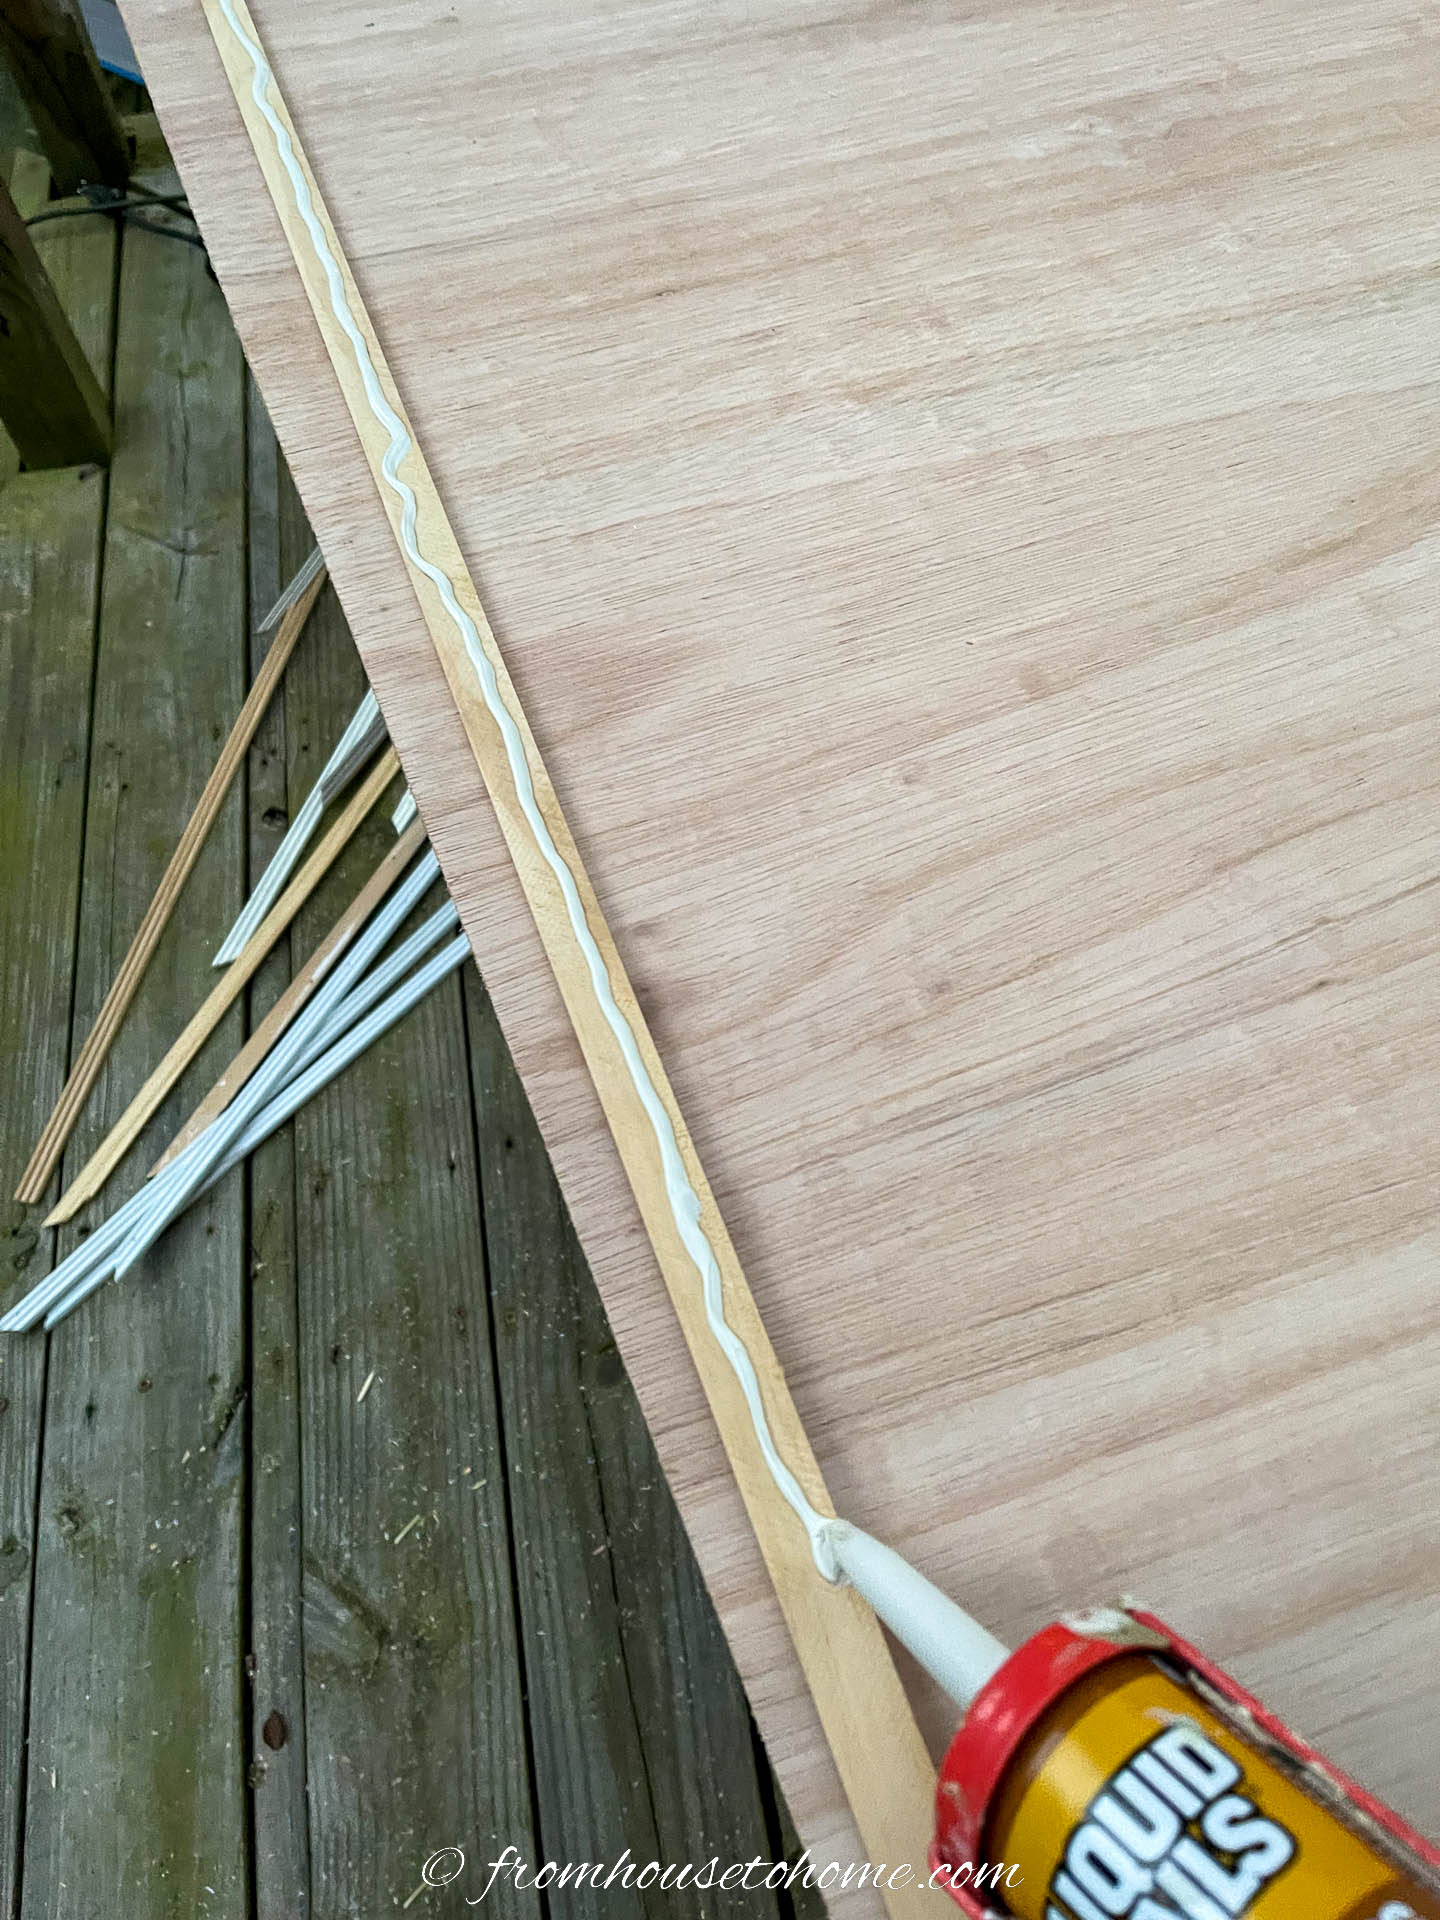 Glue on the back of the frame molding